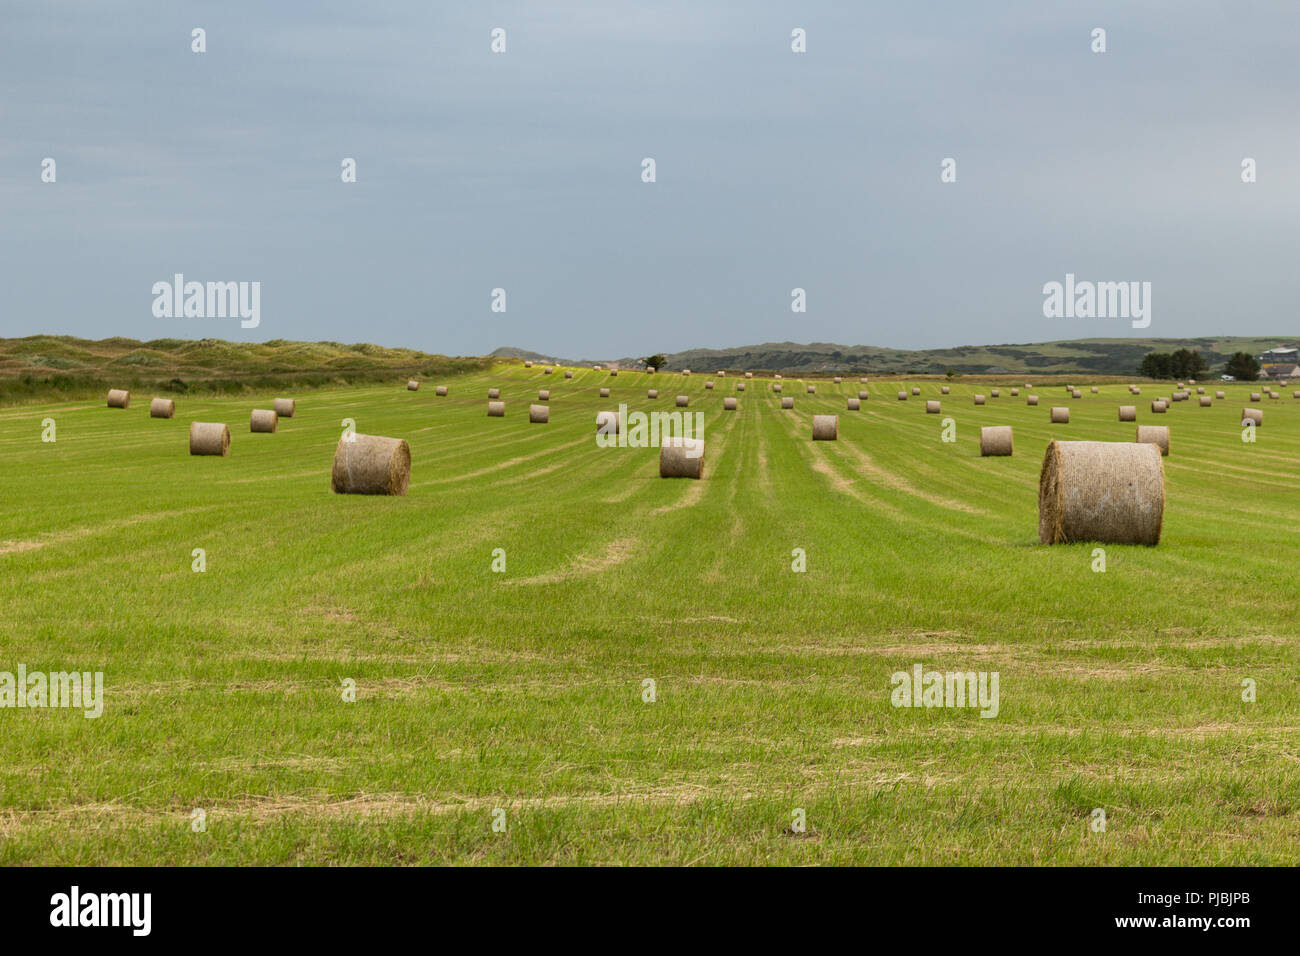 Hay-bales in a field on the outskirts of Newburgh, Aberdeenshire, Scotland. Stock Photo